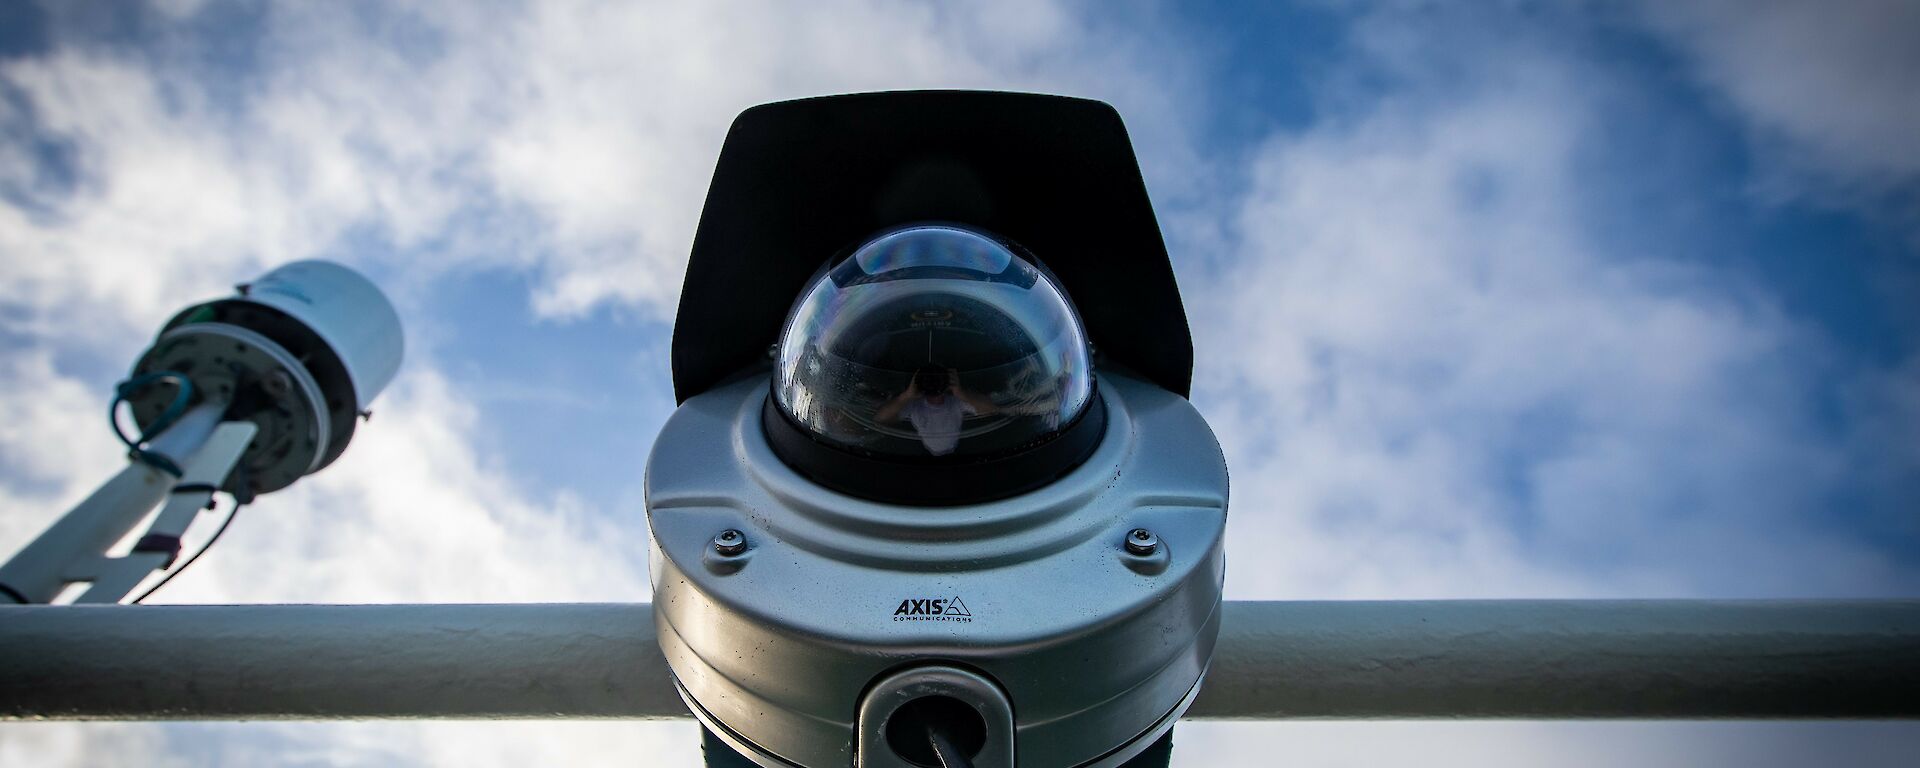 View of the webcam from below, showing the cylindrical camera body with hemispherical glass lens cover.